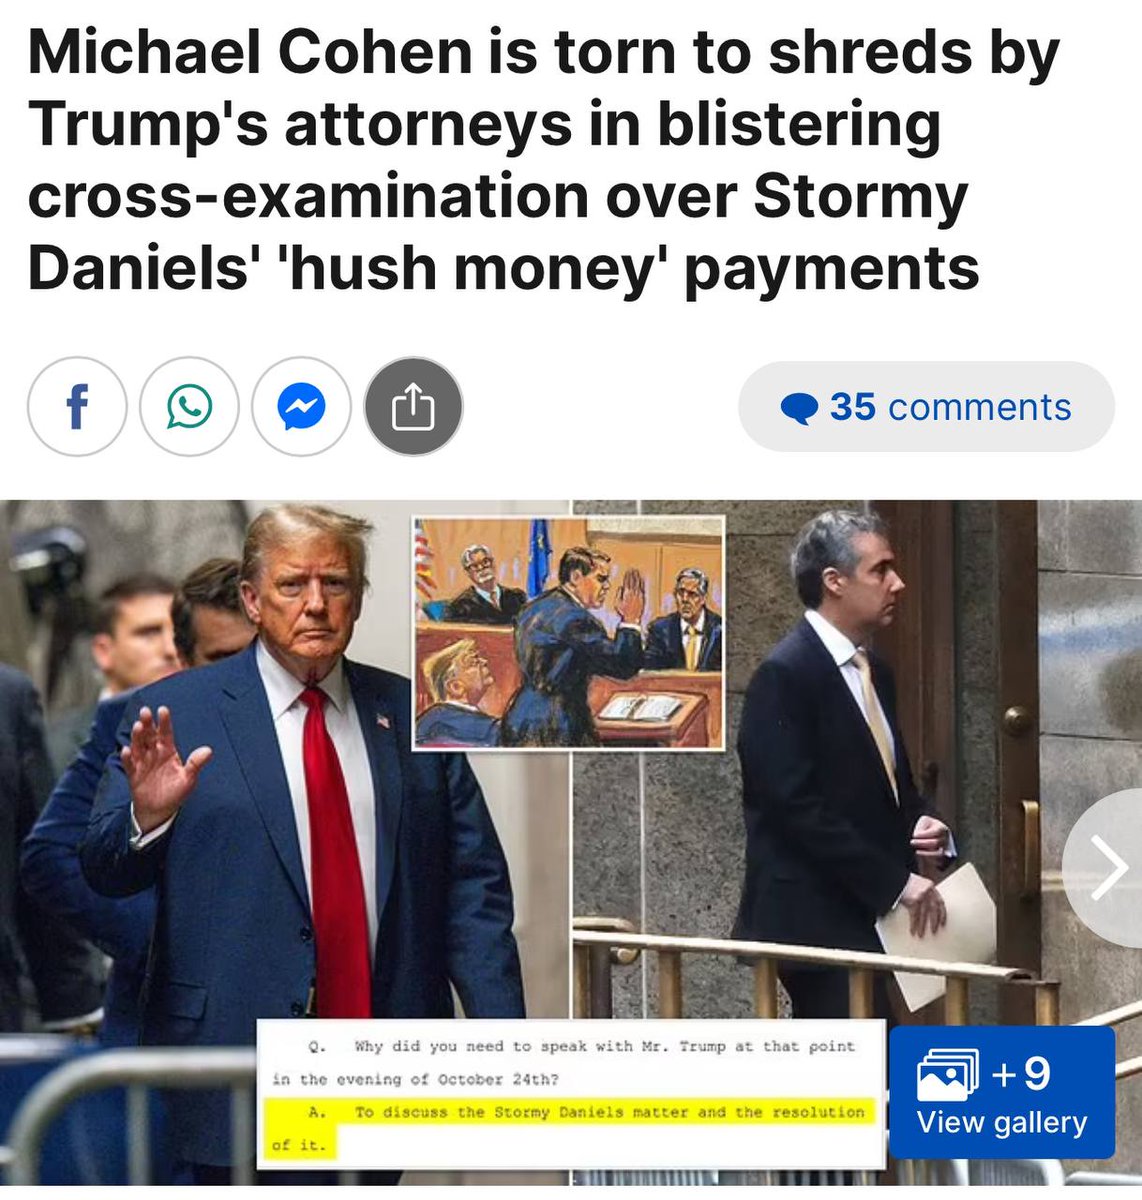 DailyMail: 'Michael Cohen is torn to shreds' in today's 'blistering cross-examination.' 'Todd Blanche delivered his blow...offering evidence that the key conversation was actually about a prank caller and not, as Cohen claimed three days earlier, about a $130,000 payment for